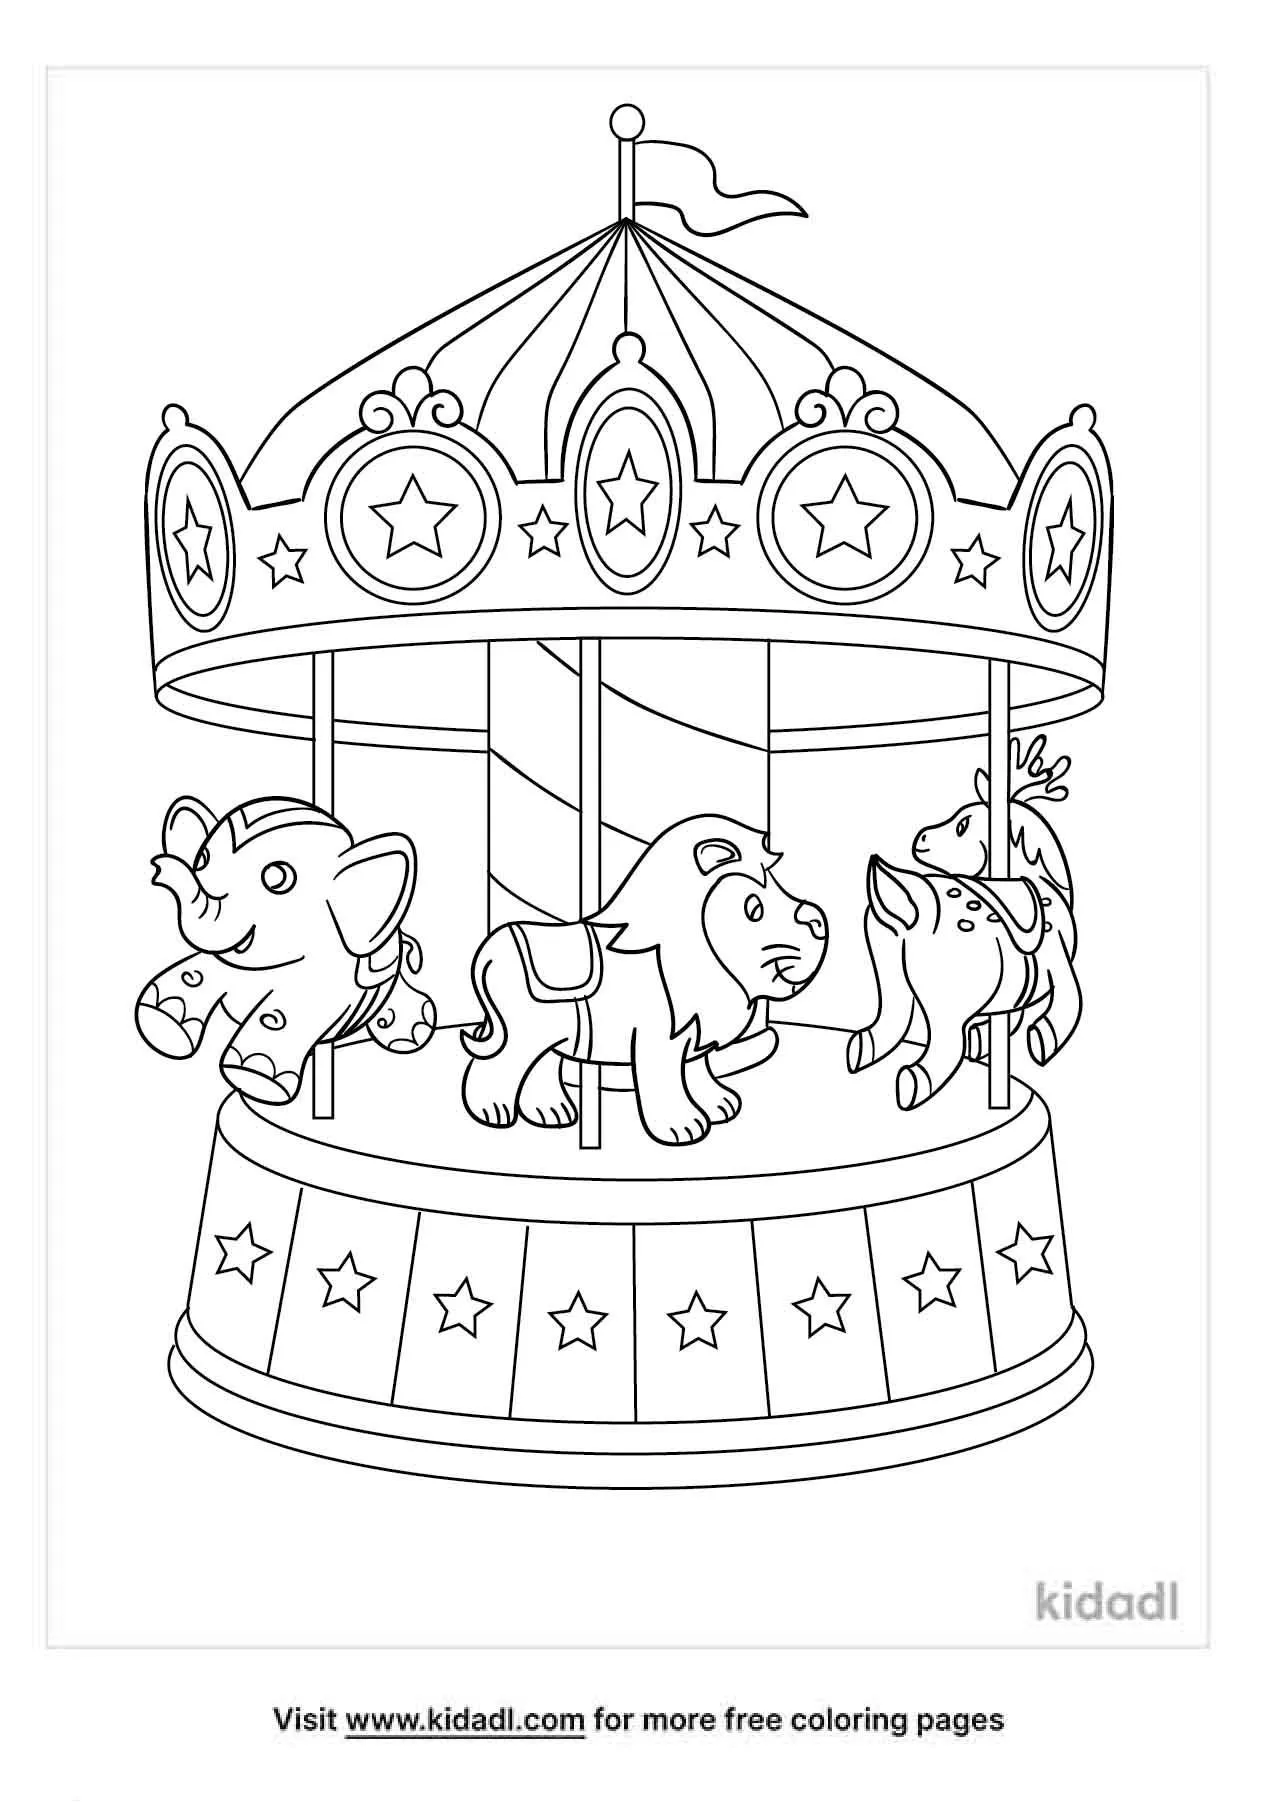 Carousel Coloring Pages Free Seasonal Celebrations Coloring Pages Kidadl